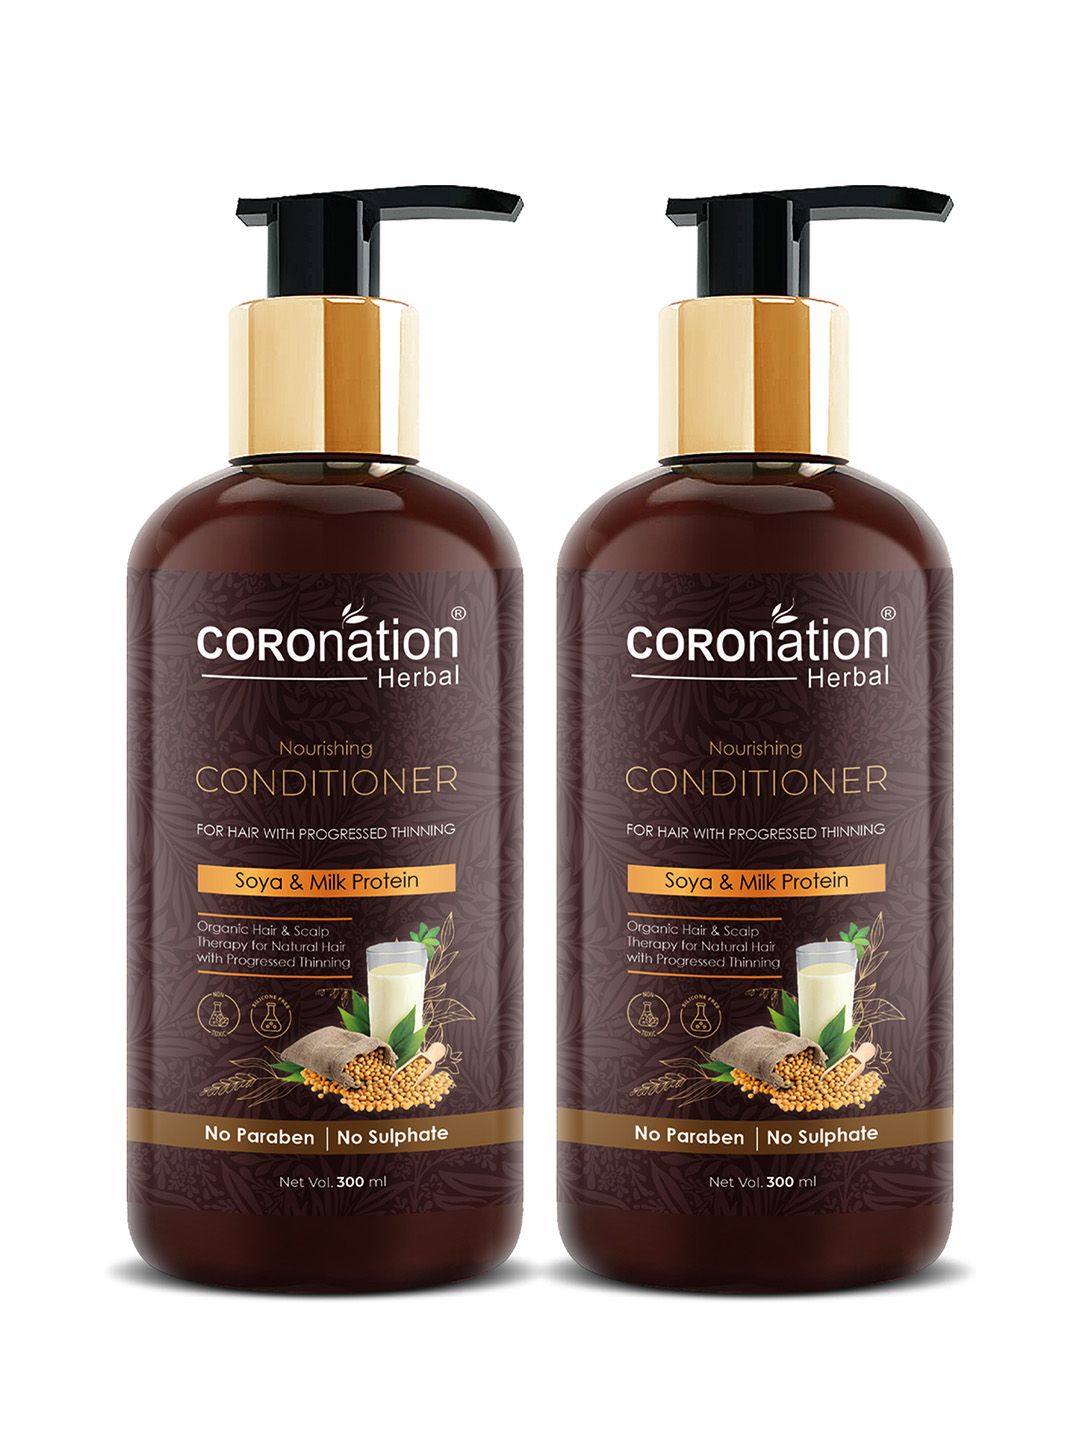 COROnation Herbal Set of 2 Nourishing Conditioner with Soya & Milk Protein 300 ml each Price in India